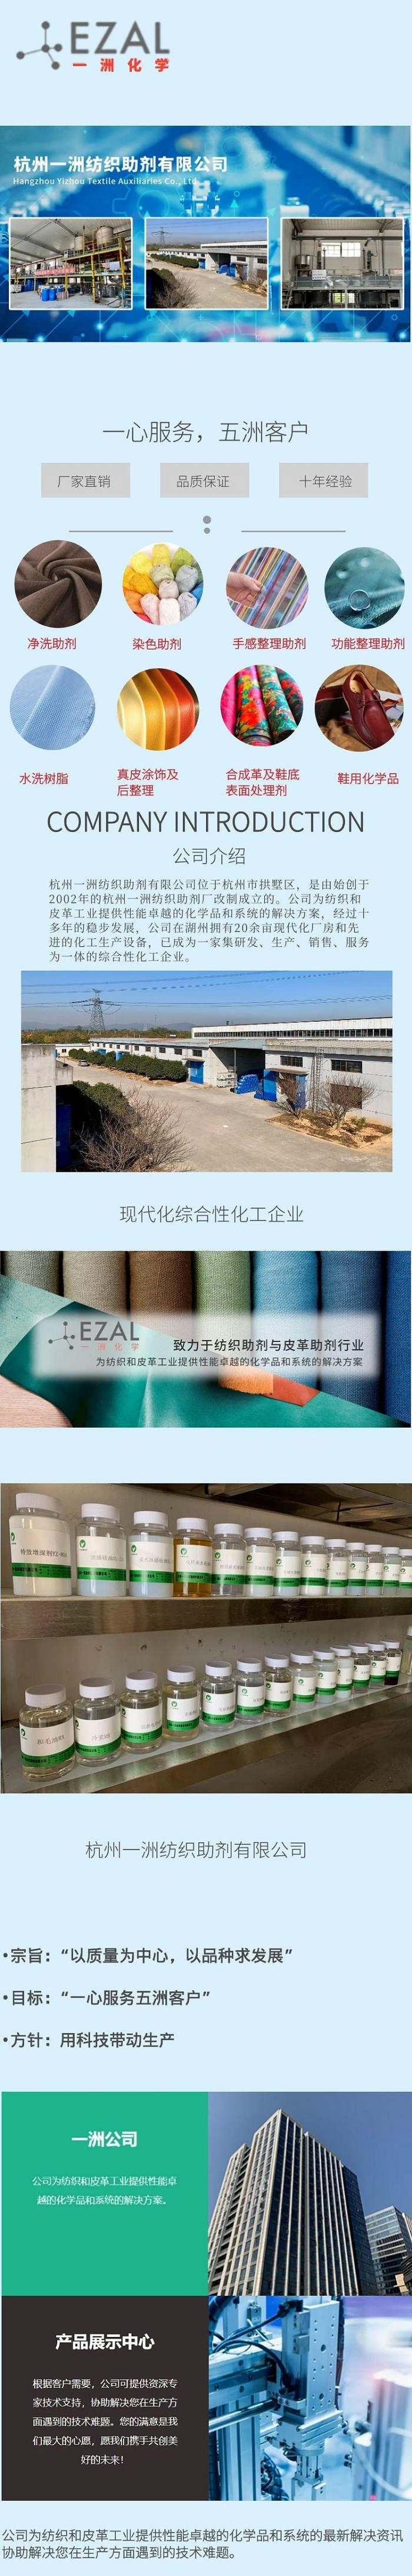 Chemical fiber smoother ET polyester and nylon yarn smoothes chemical fiber cloth, improving smoothness and stability